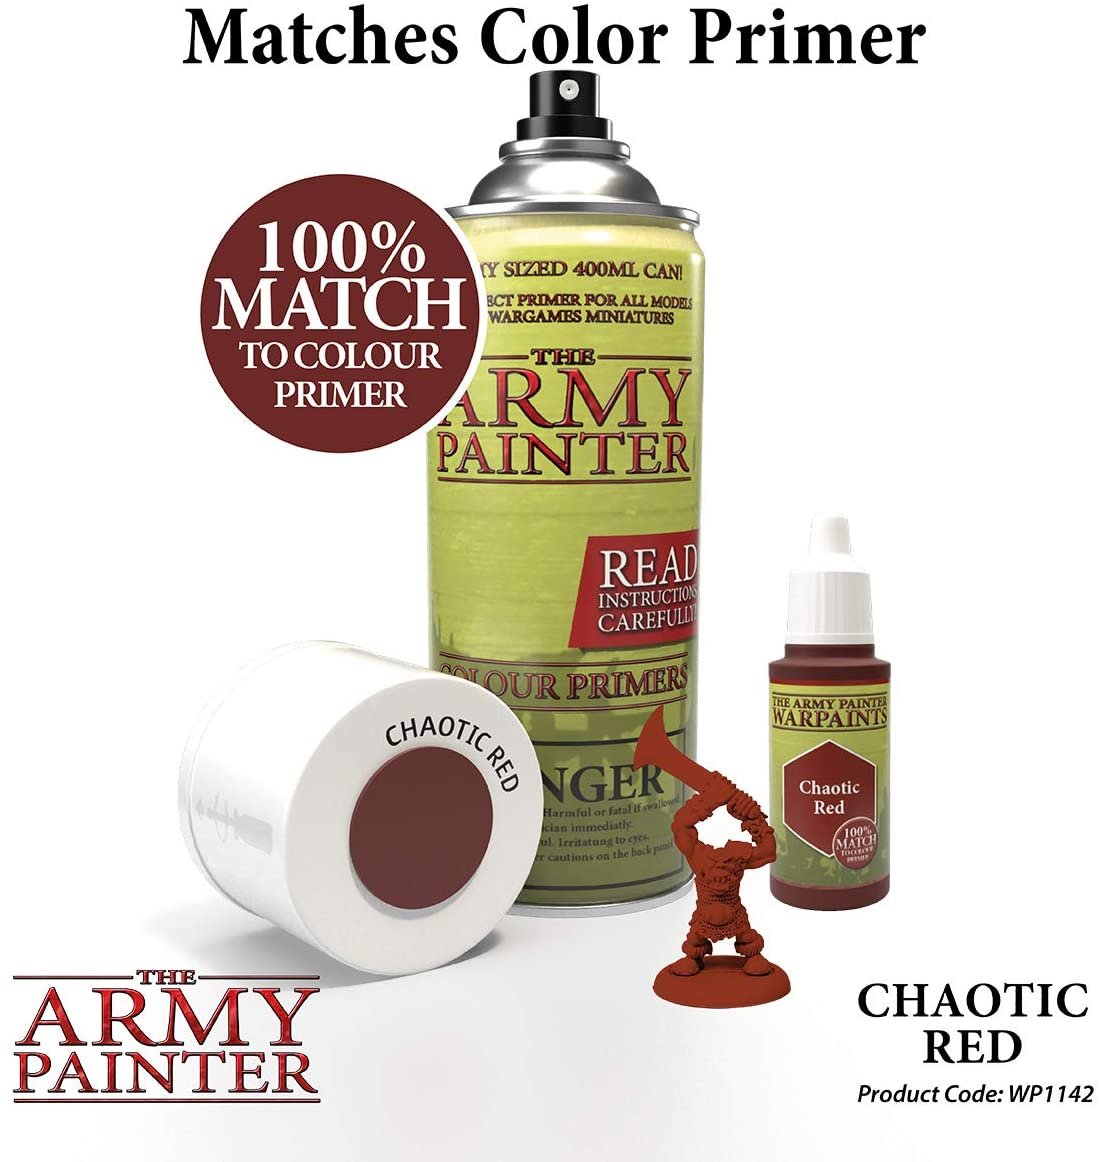 The Army Painter - Warpaints: Chaotic Red (18ml/0.6oz)